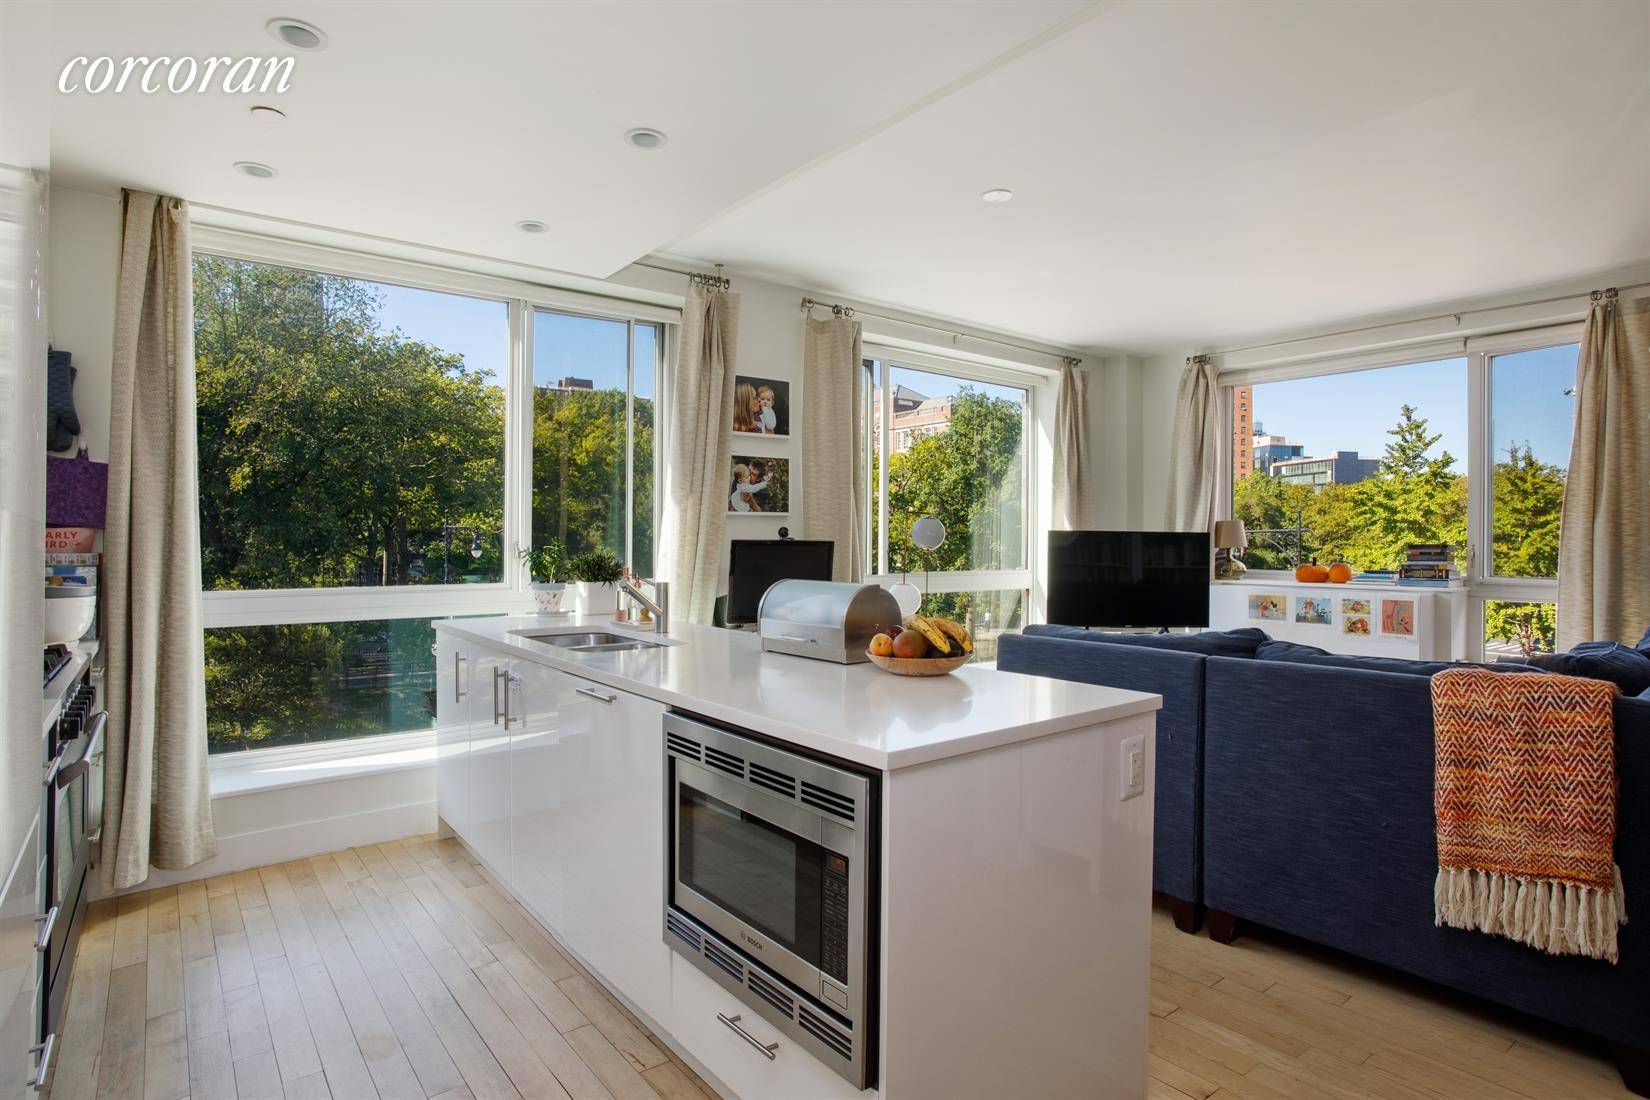 EVERY ROOM WITH A VIEW ! Full park views and sunshine fill this extraordinary home !